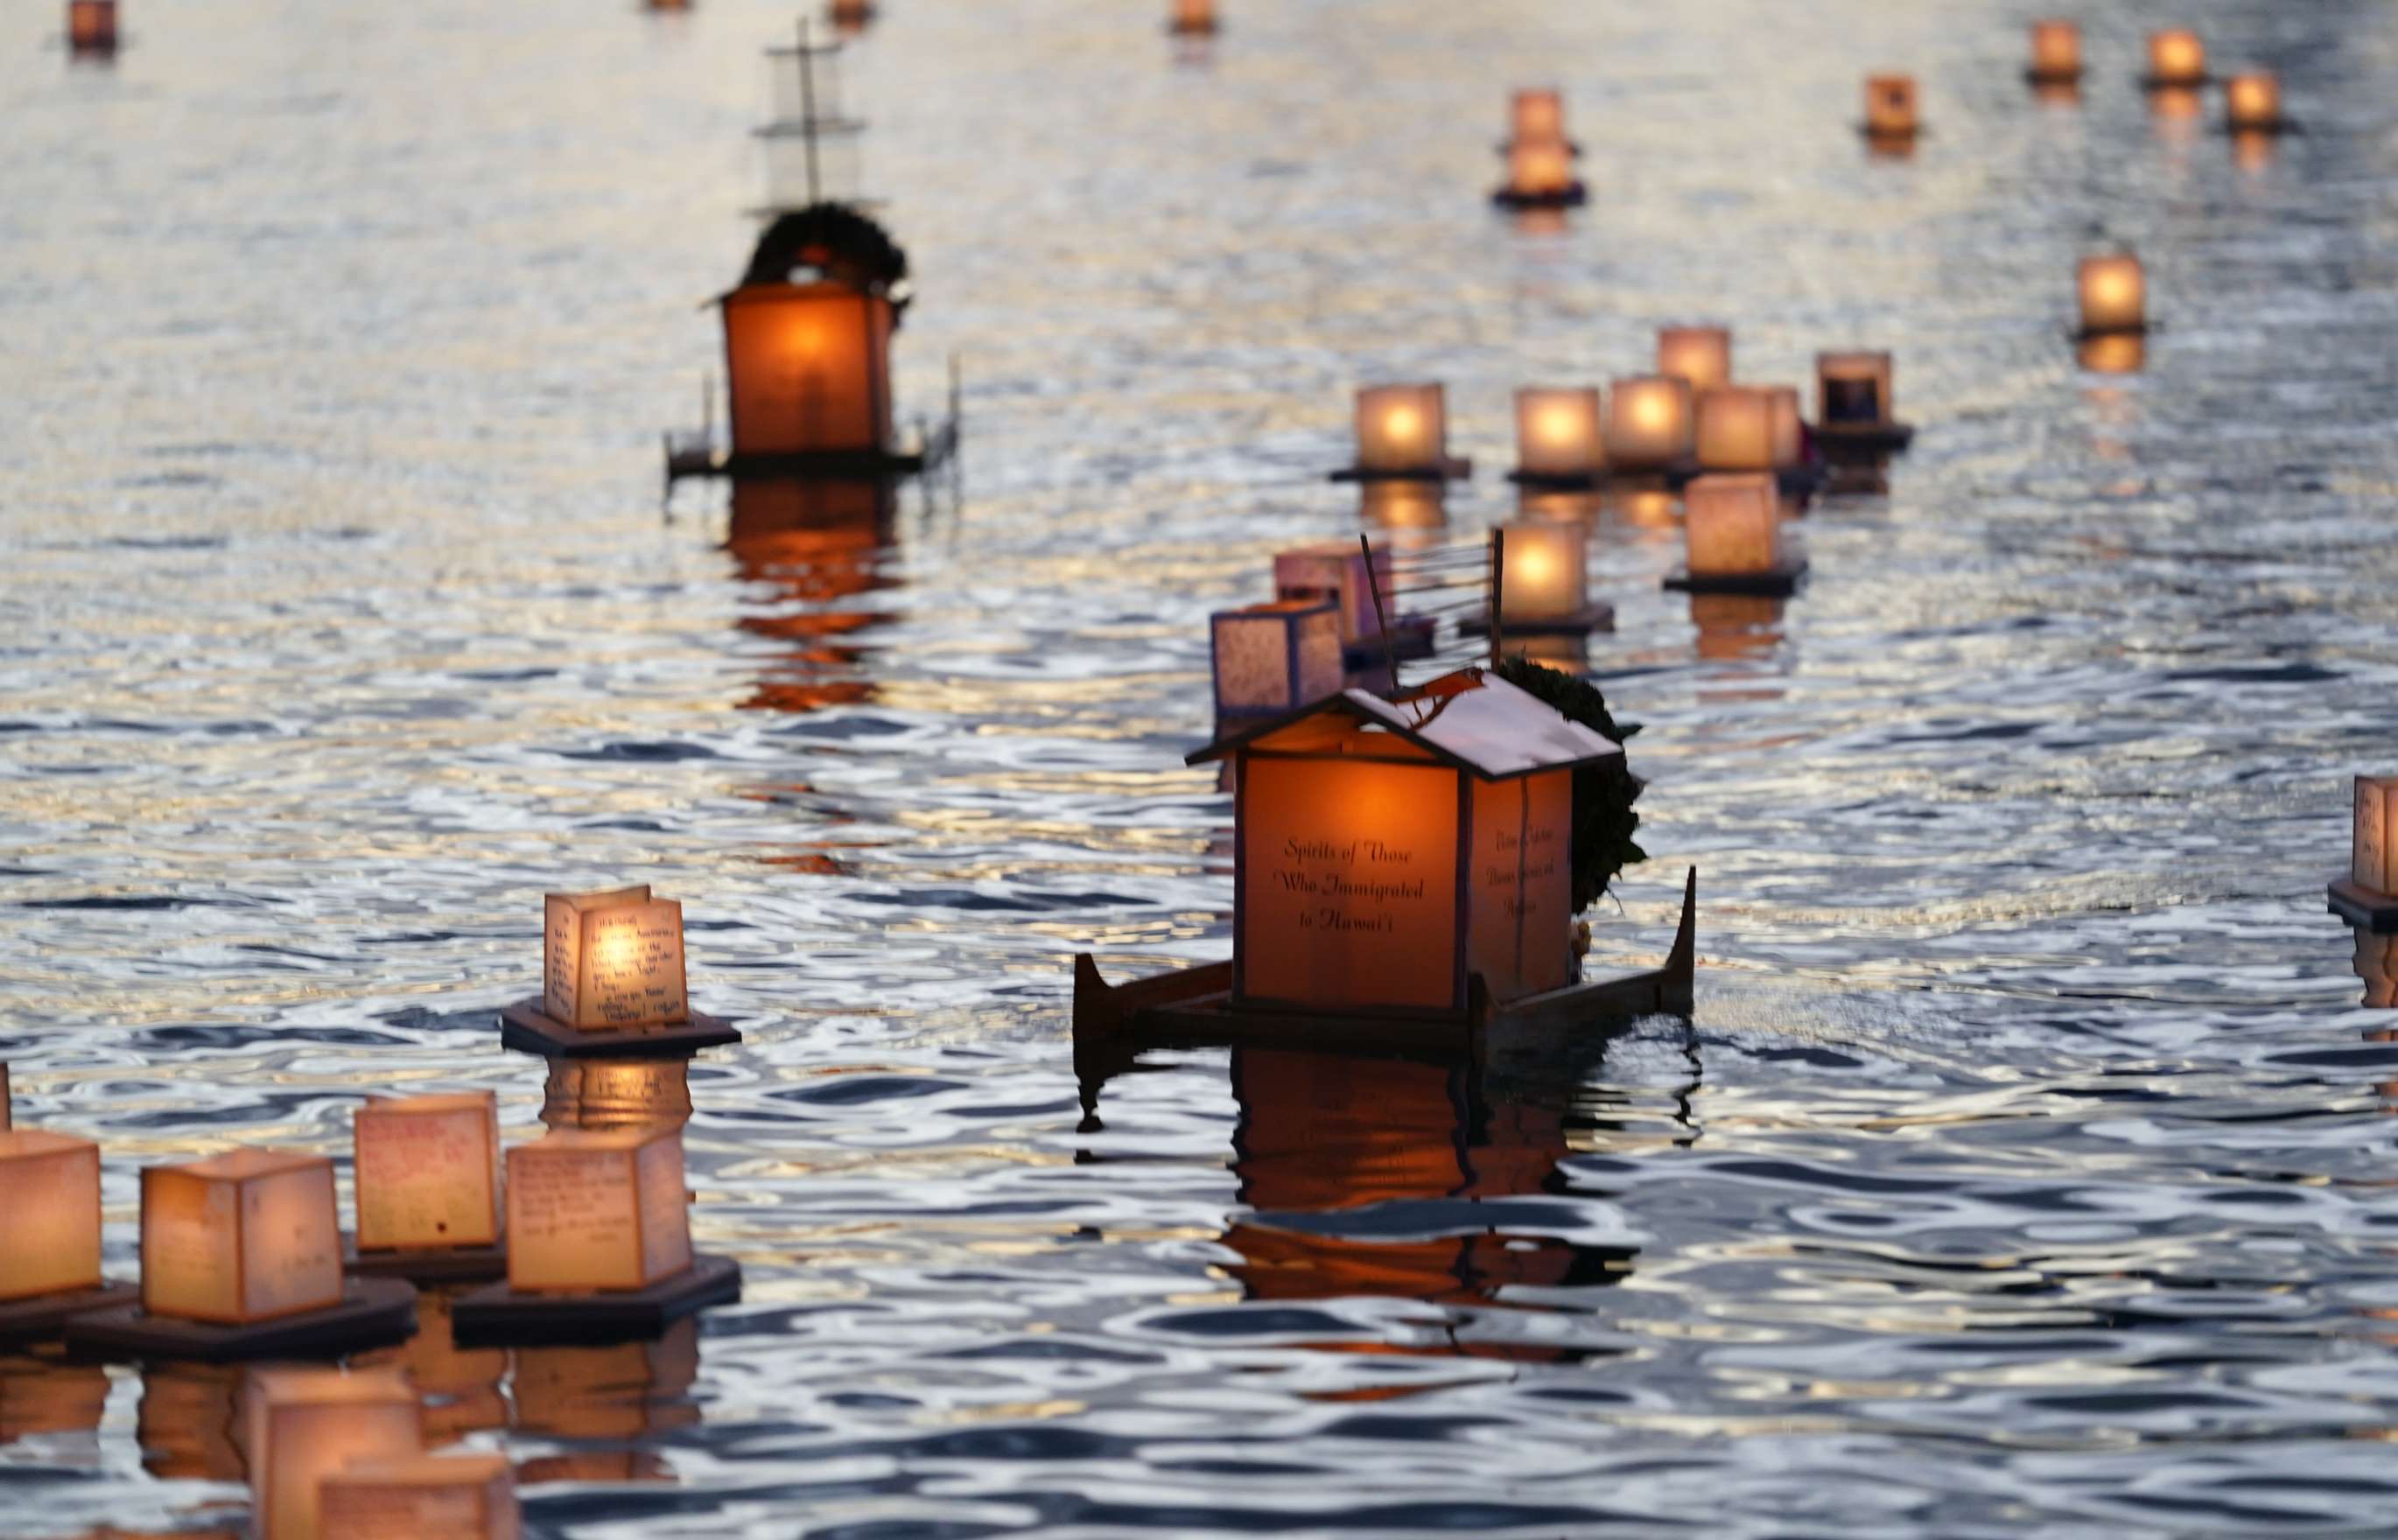 Two large, double-hulled floating lanterns made of wood and paper, illuminated from within, float on the gentle waves of a twilit ocean bay amid numerous smaller illuminated floating lanterns.